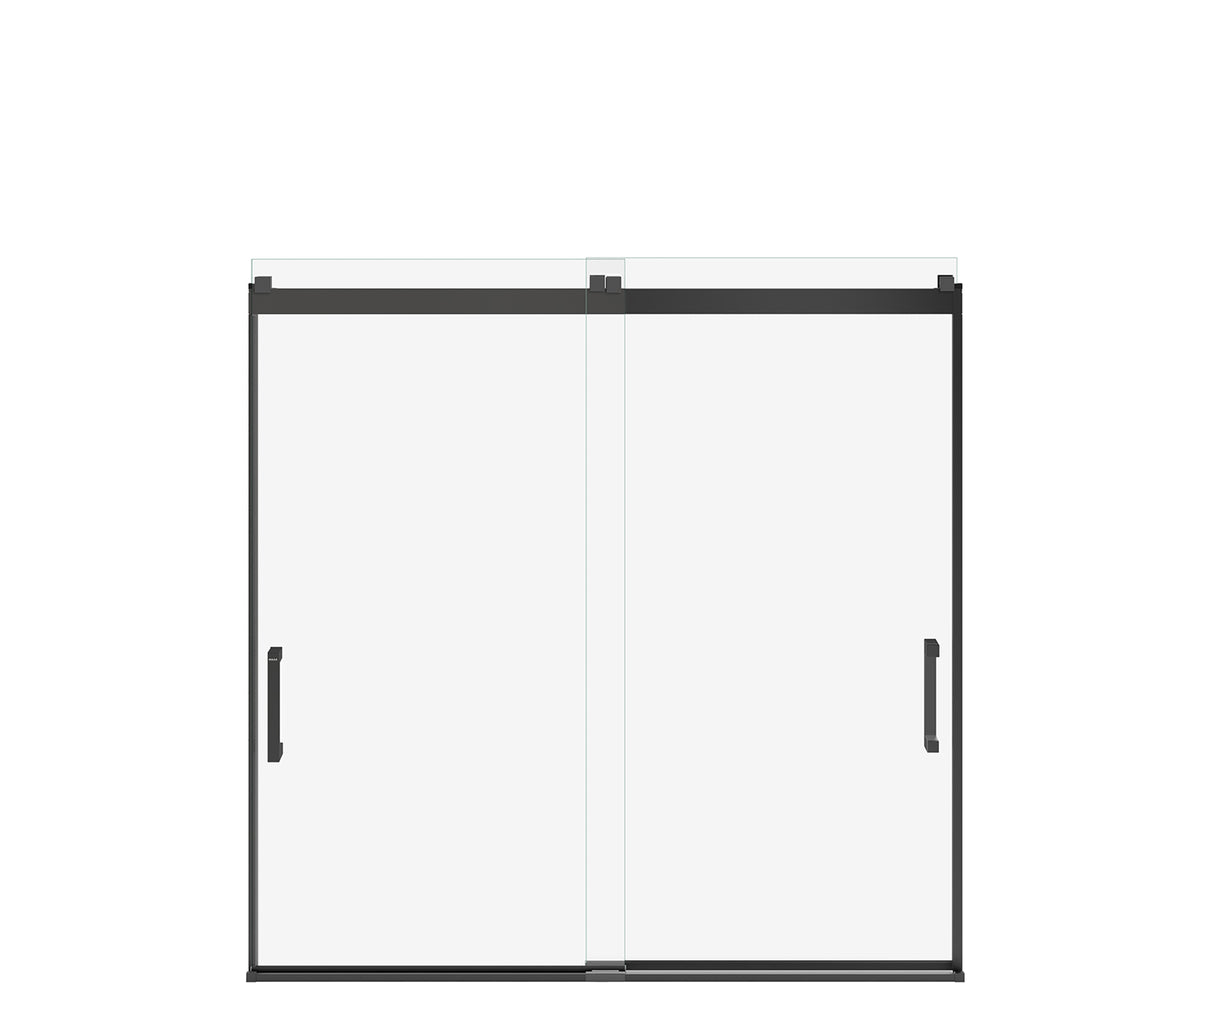 MAAX 135692-900-340-000 Revelation Square 56-59 x 56 ¾-59 ¼ in. 6 mm Bypass Tub Door for Alcove Installation with Clear glass in Matte Black